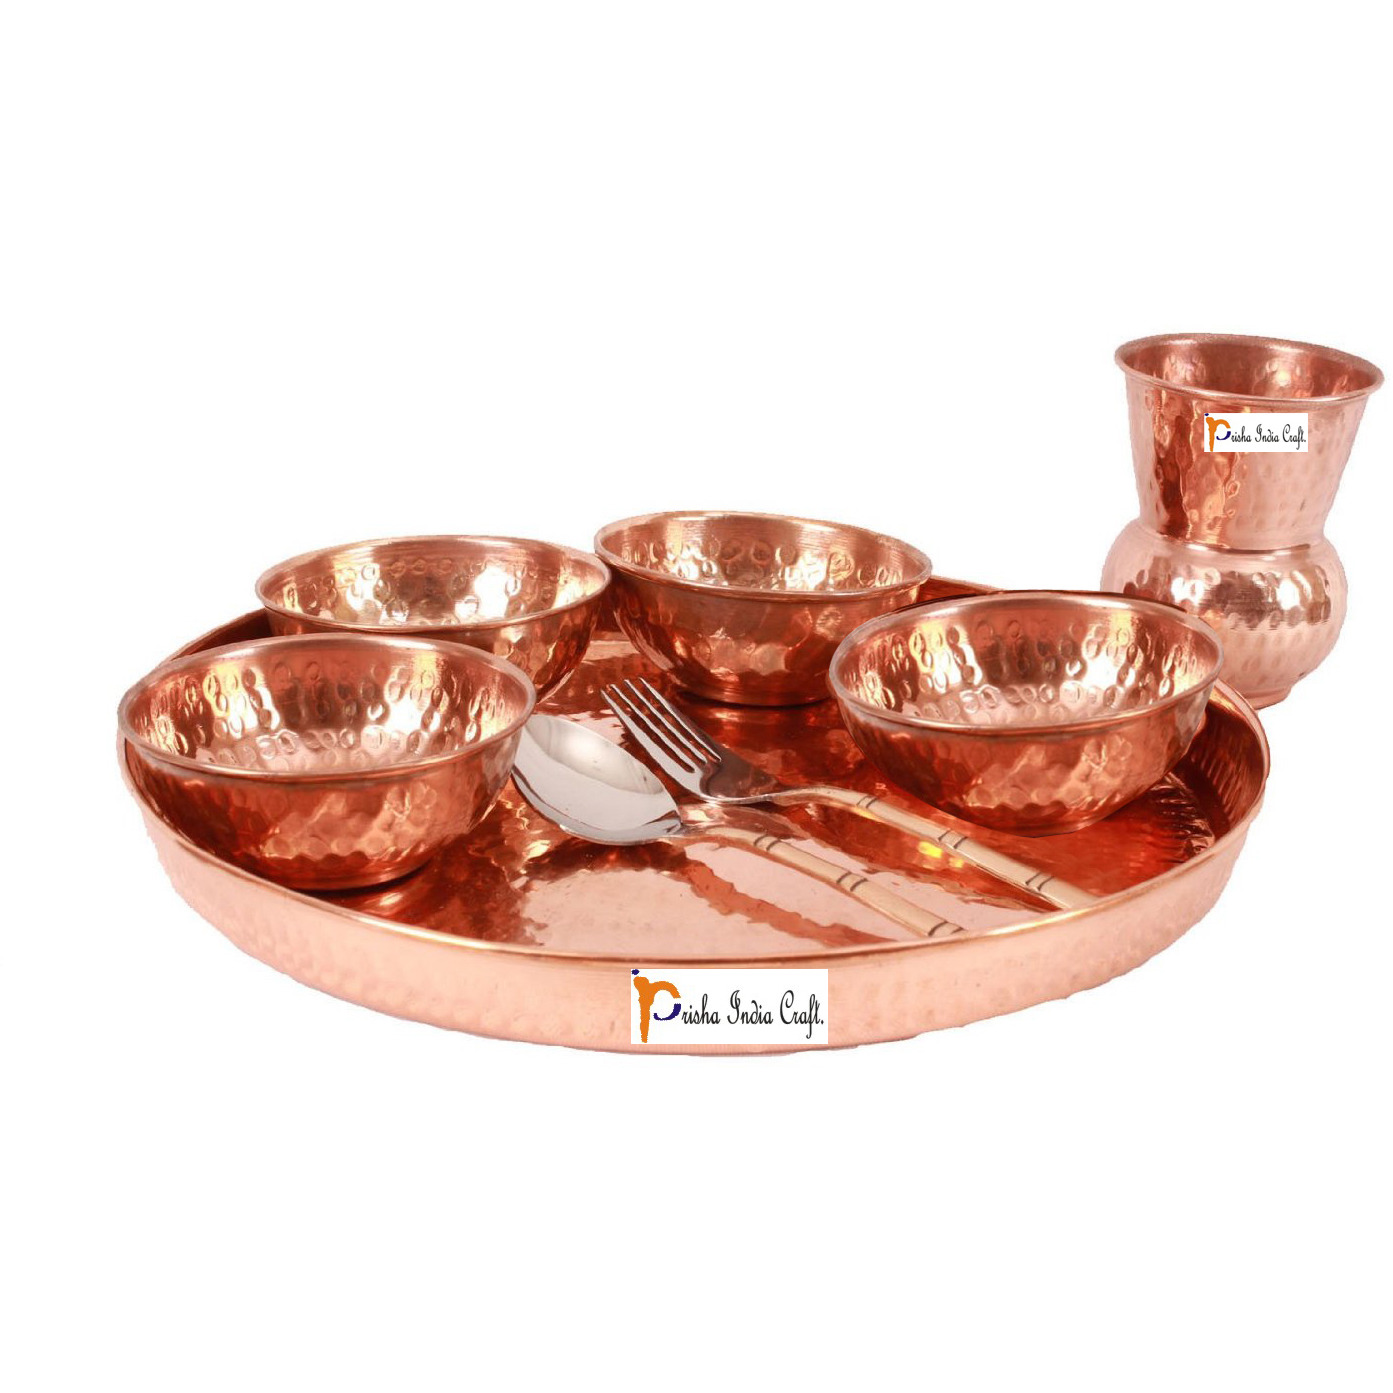 Prisha India Craft B. Set of 2 Dinnerware Traditional 100% Pure Copper Dinner Set of Thali Plate, Bowls, Glass and Spoon, Dia 12  With 1 Pure Copper Mughal Pitcher Jug - Christmas Gift